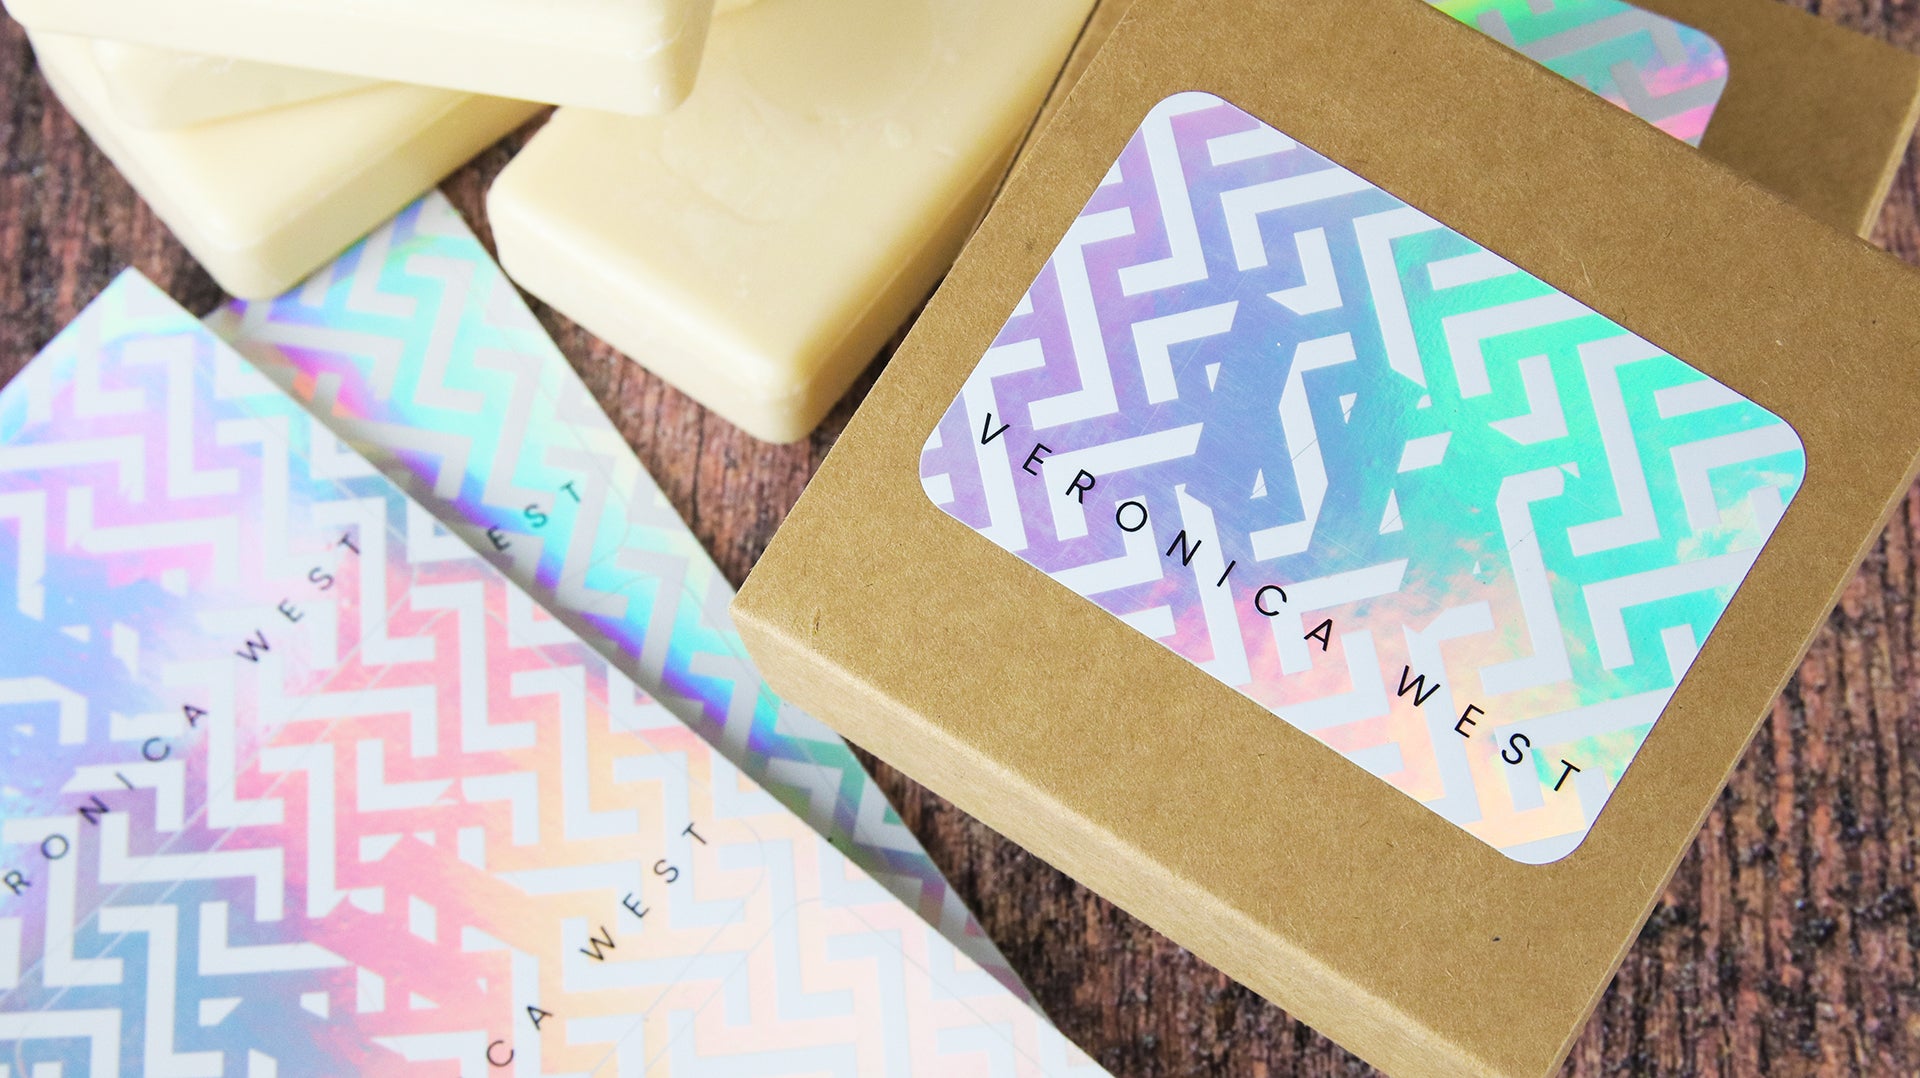 Rounded corner holographic label with victoria west logo applied to cardboard soap boxes